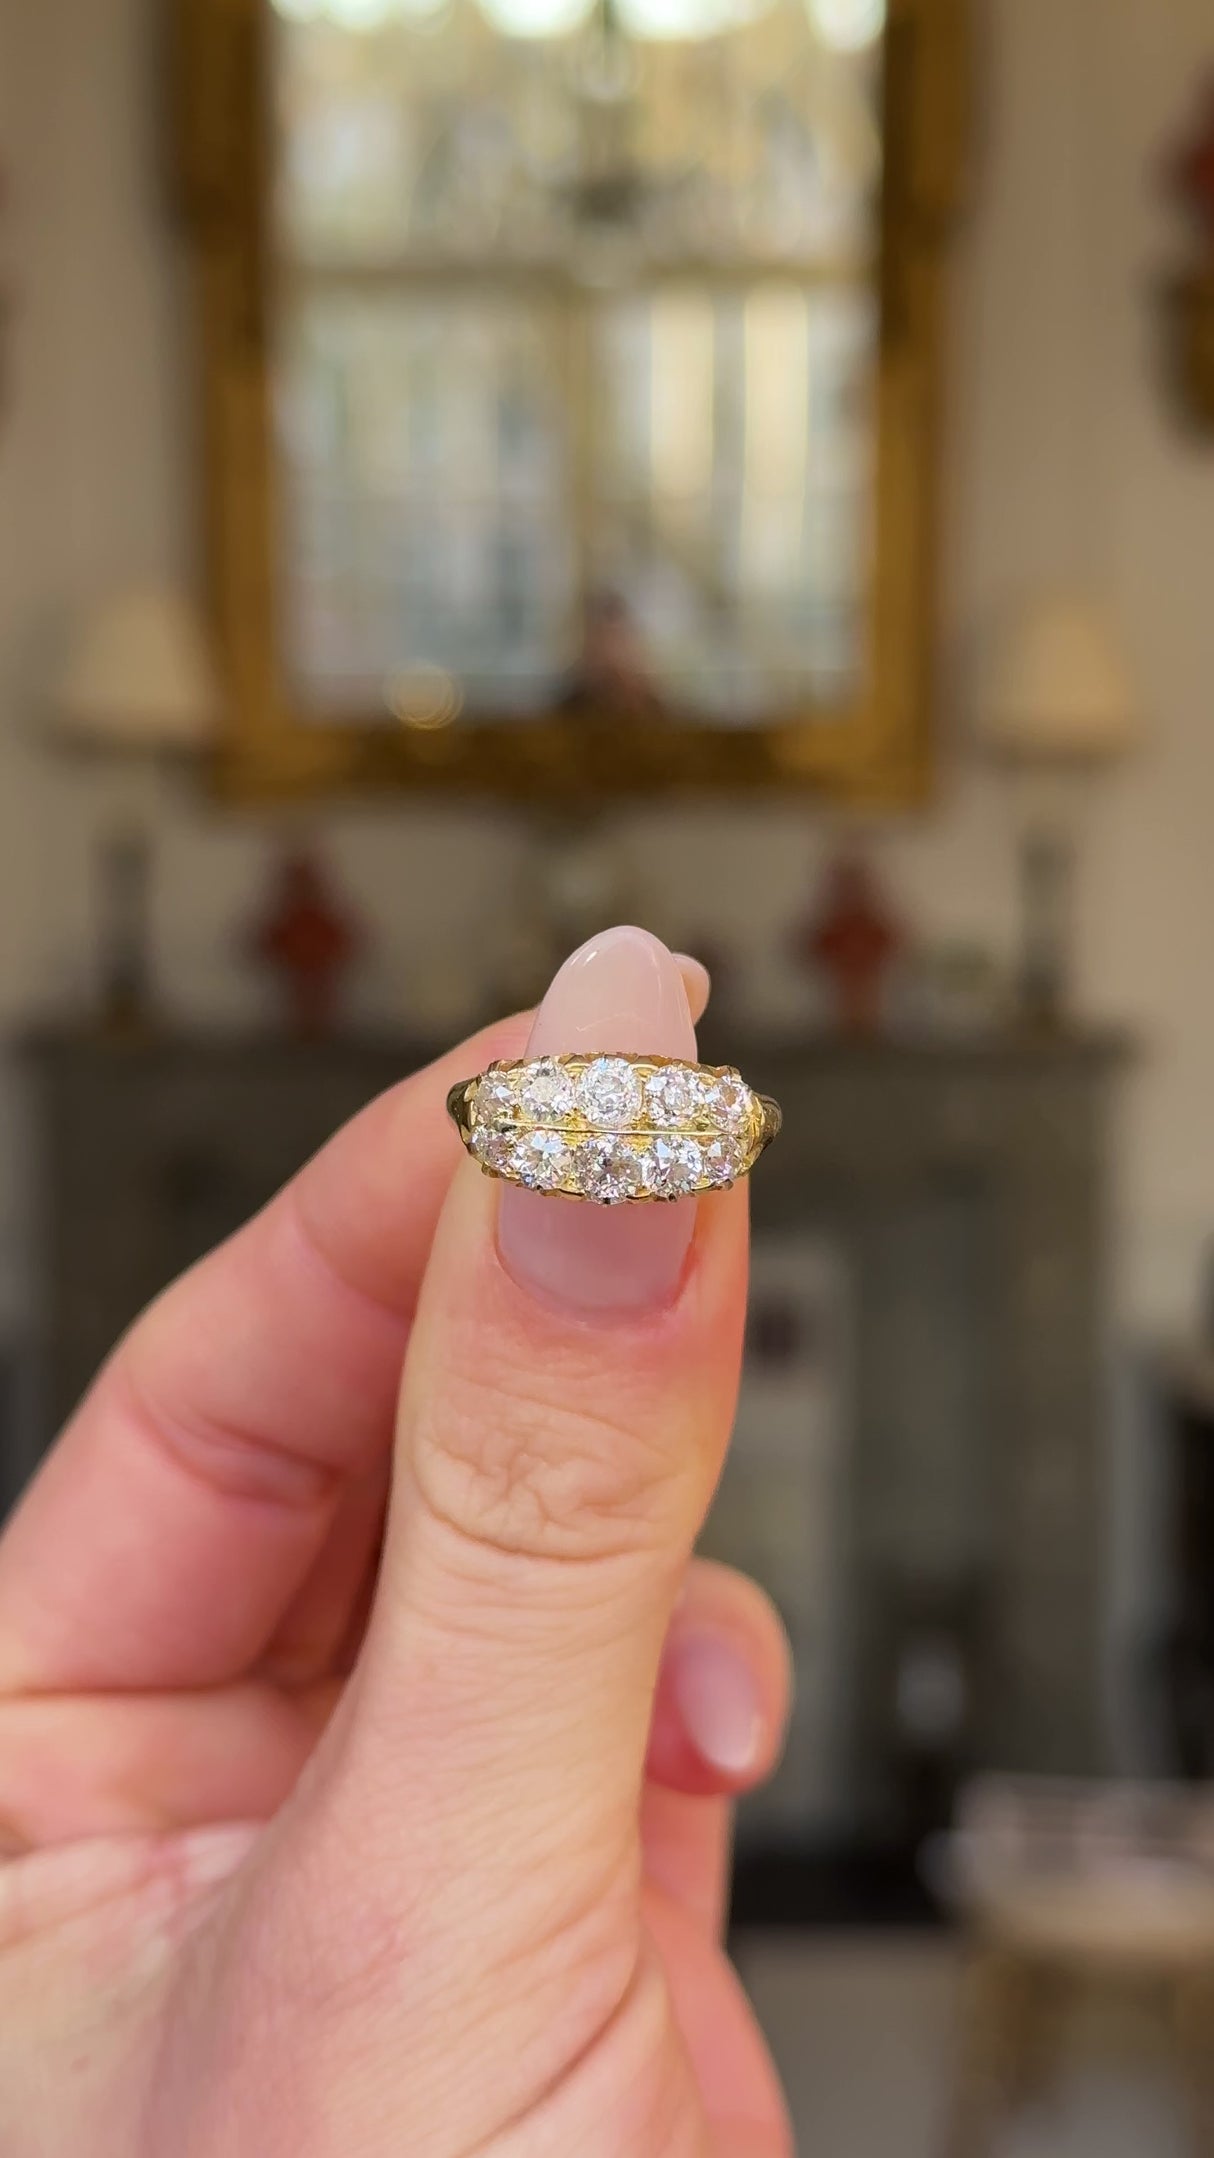 victorian double row diamond band held in fingers and moved around to give perspective.